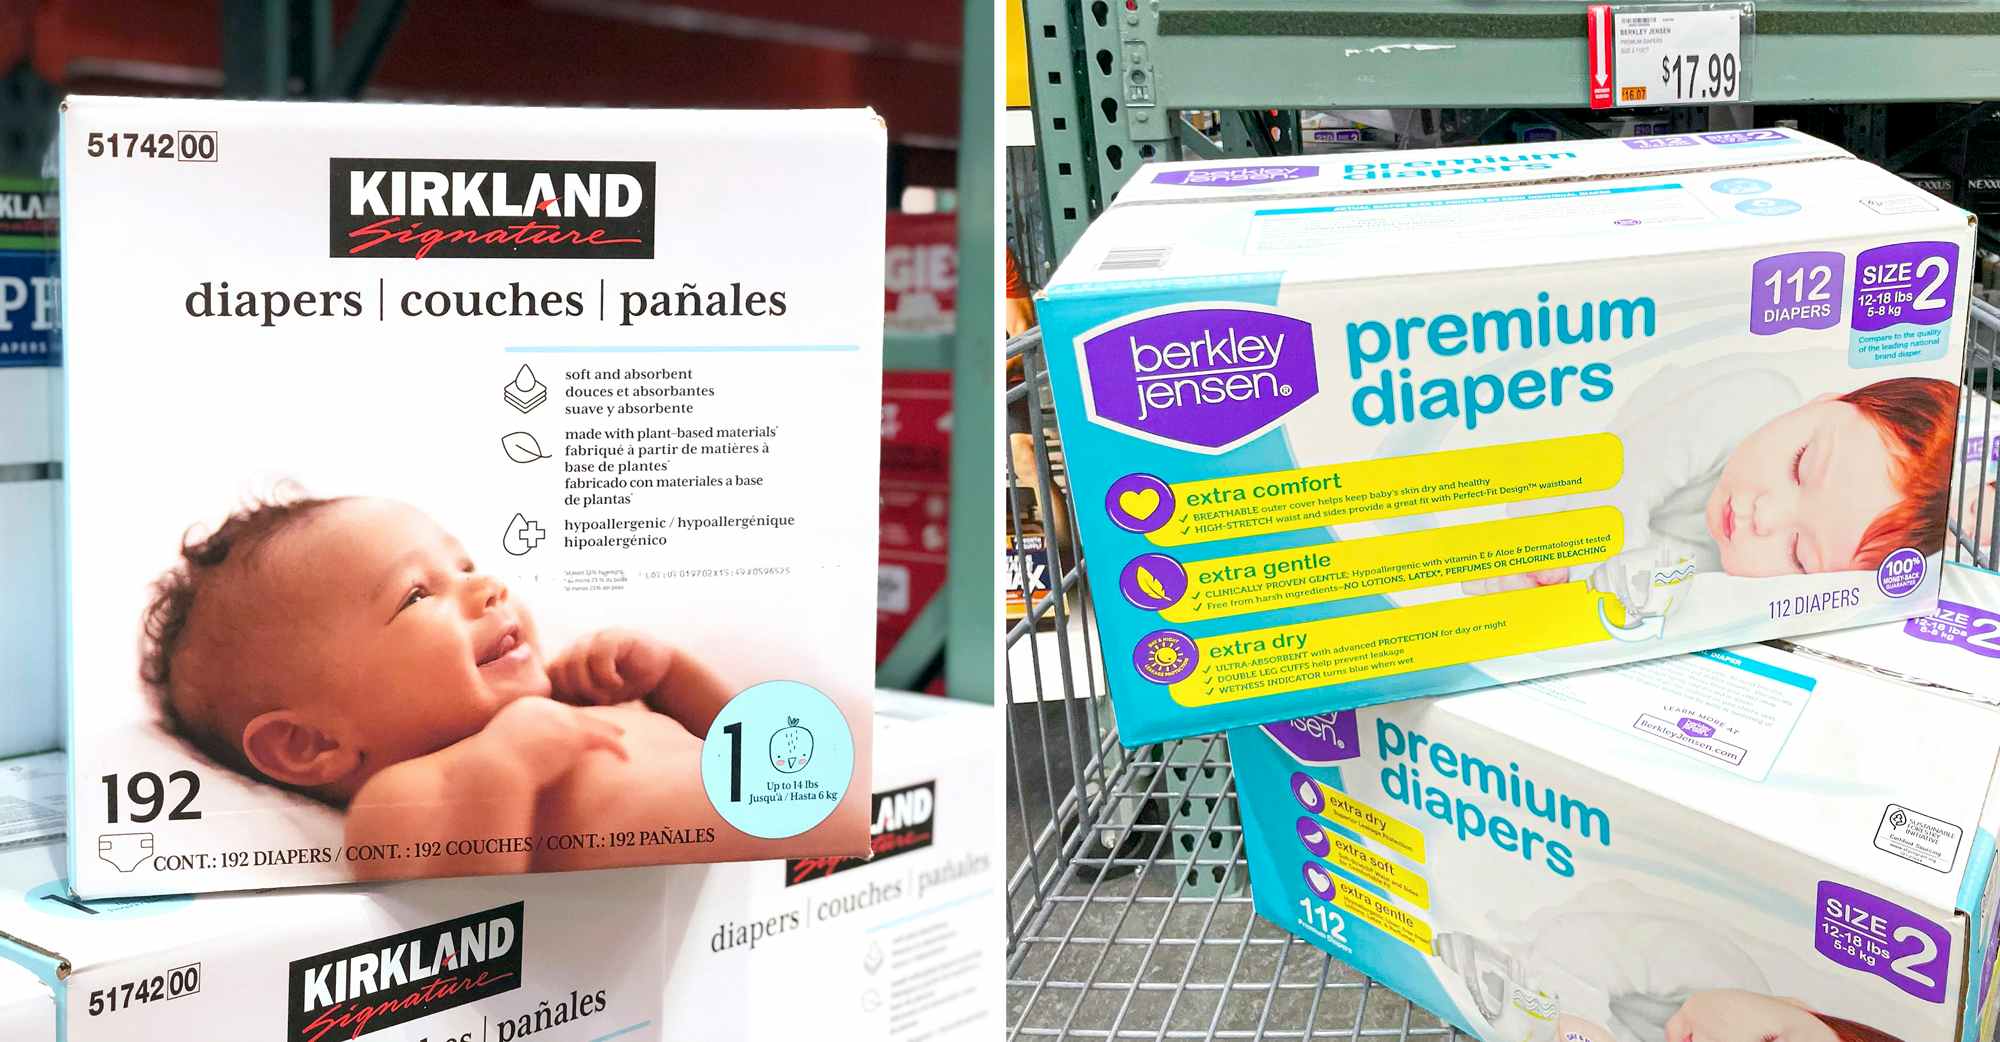 side-by-side comparison of costco kirkland and bj's berkley jensen store-brand diapers at costco in store